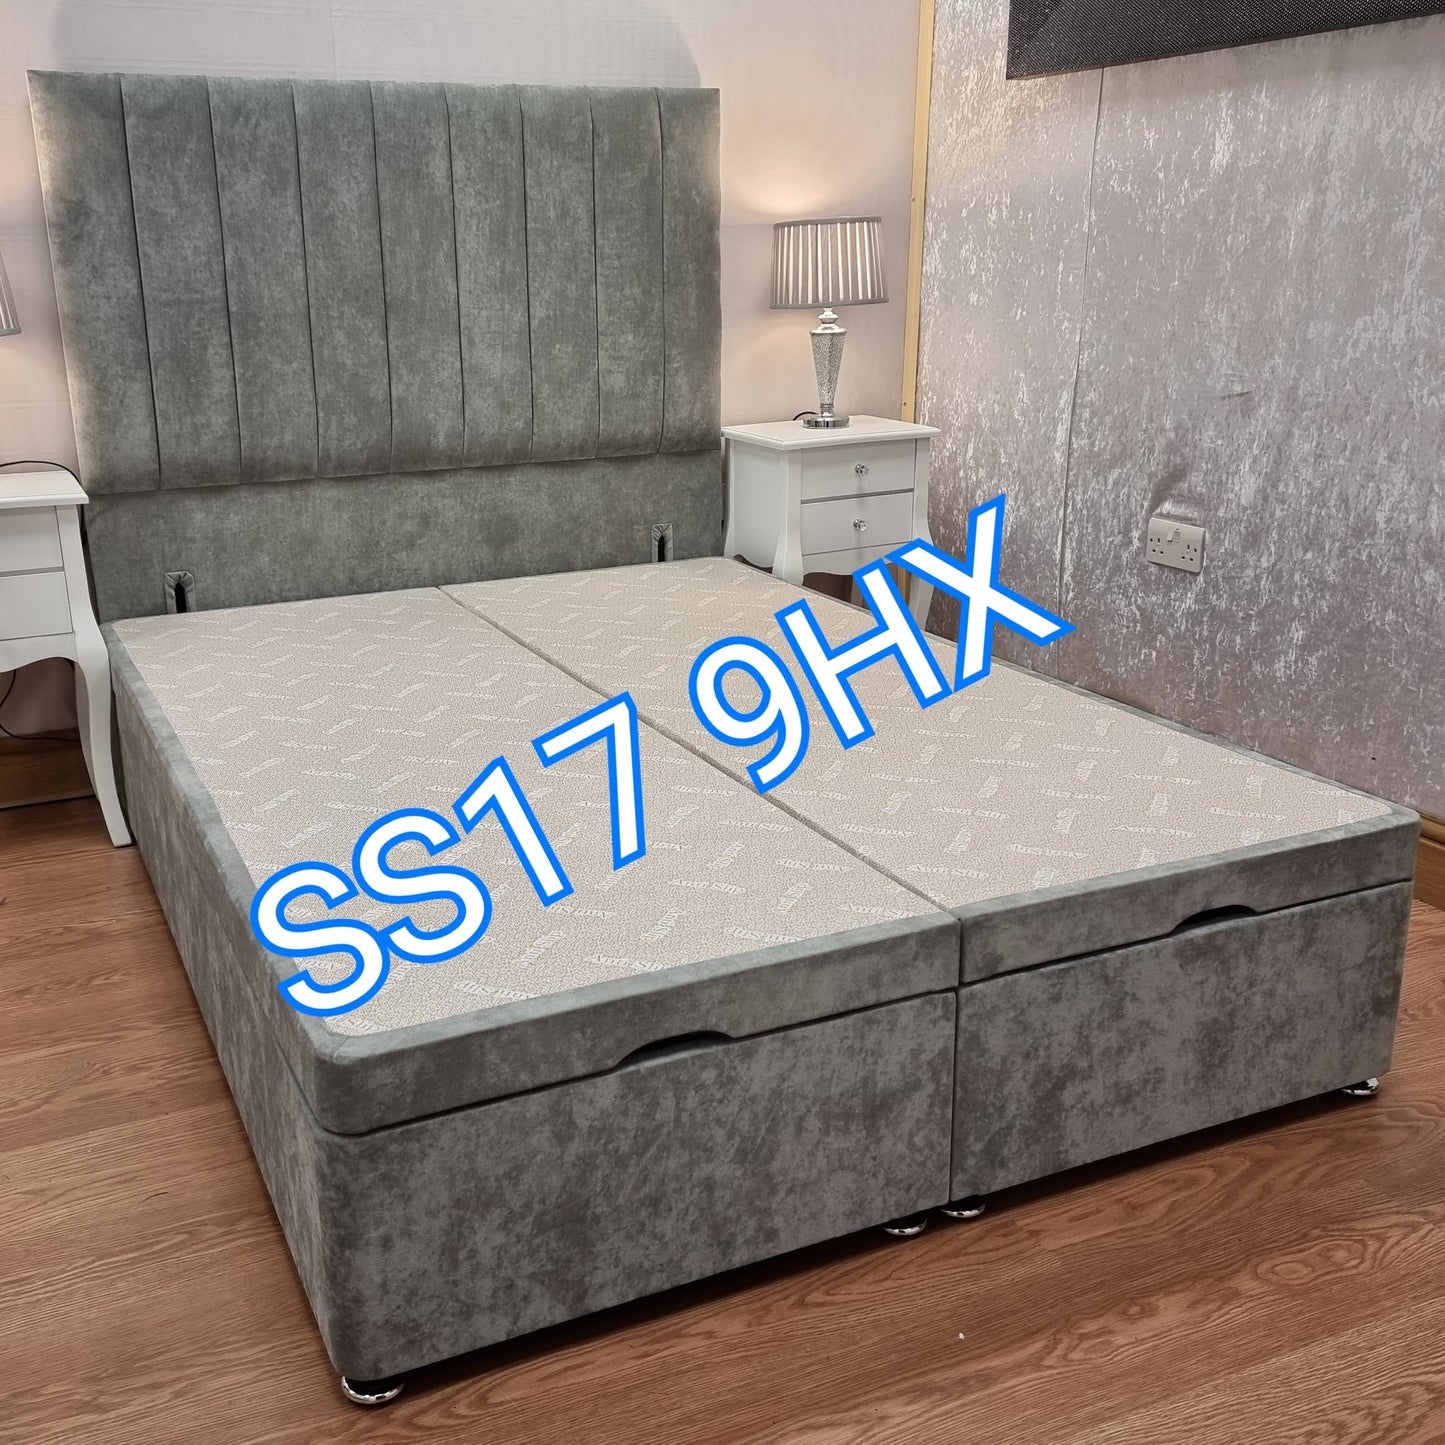 King Size Beds - New york ottoman storage divan bed